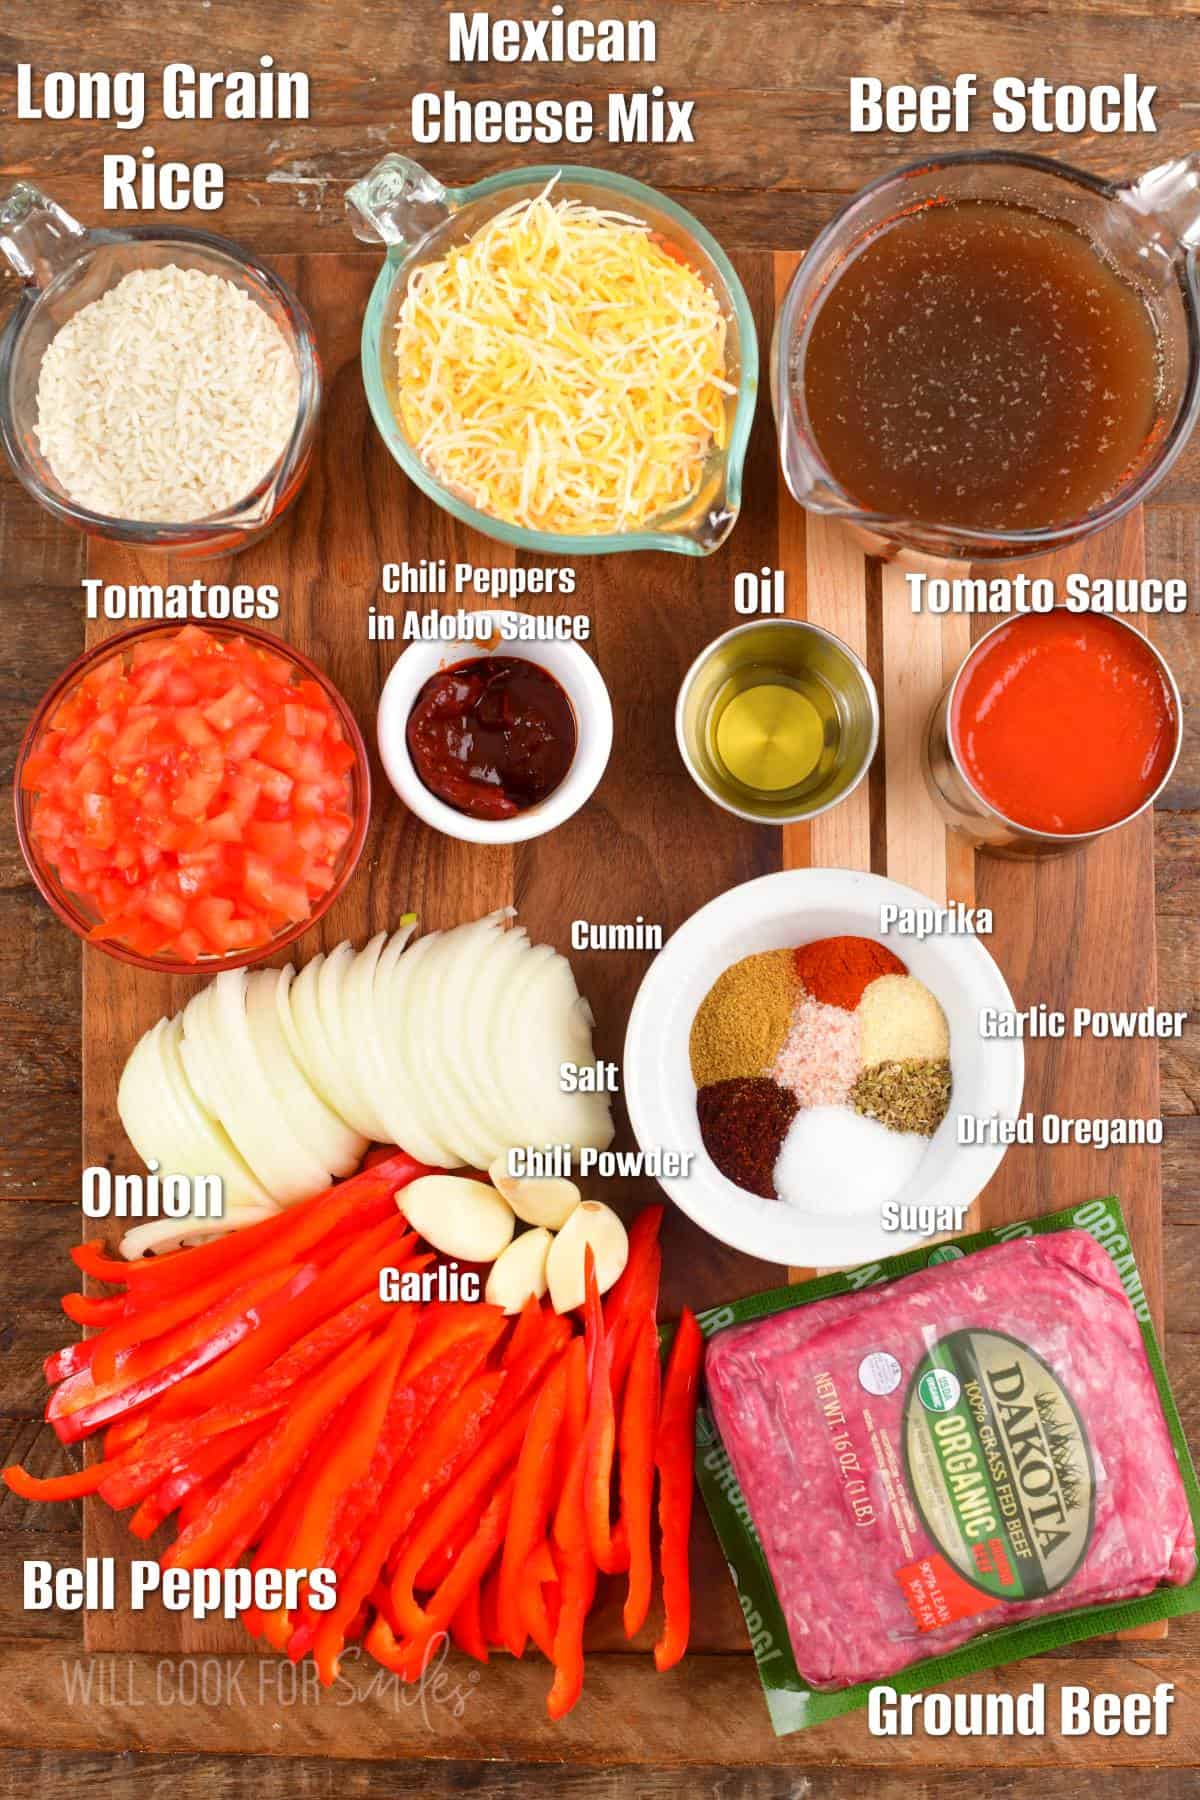 labeled ingredients for beef enchilada casserole on the wooden board.